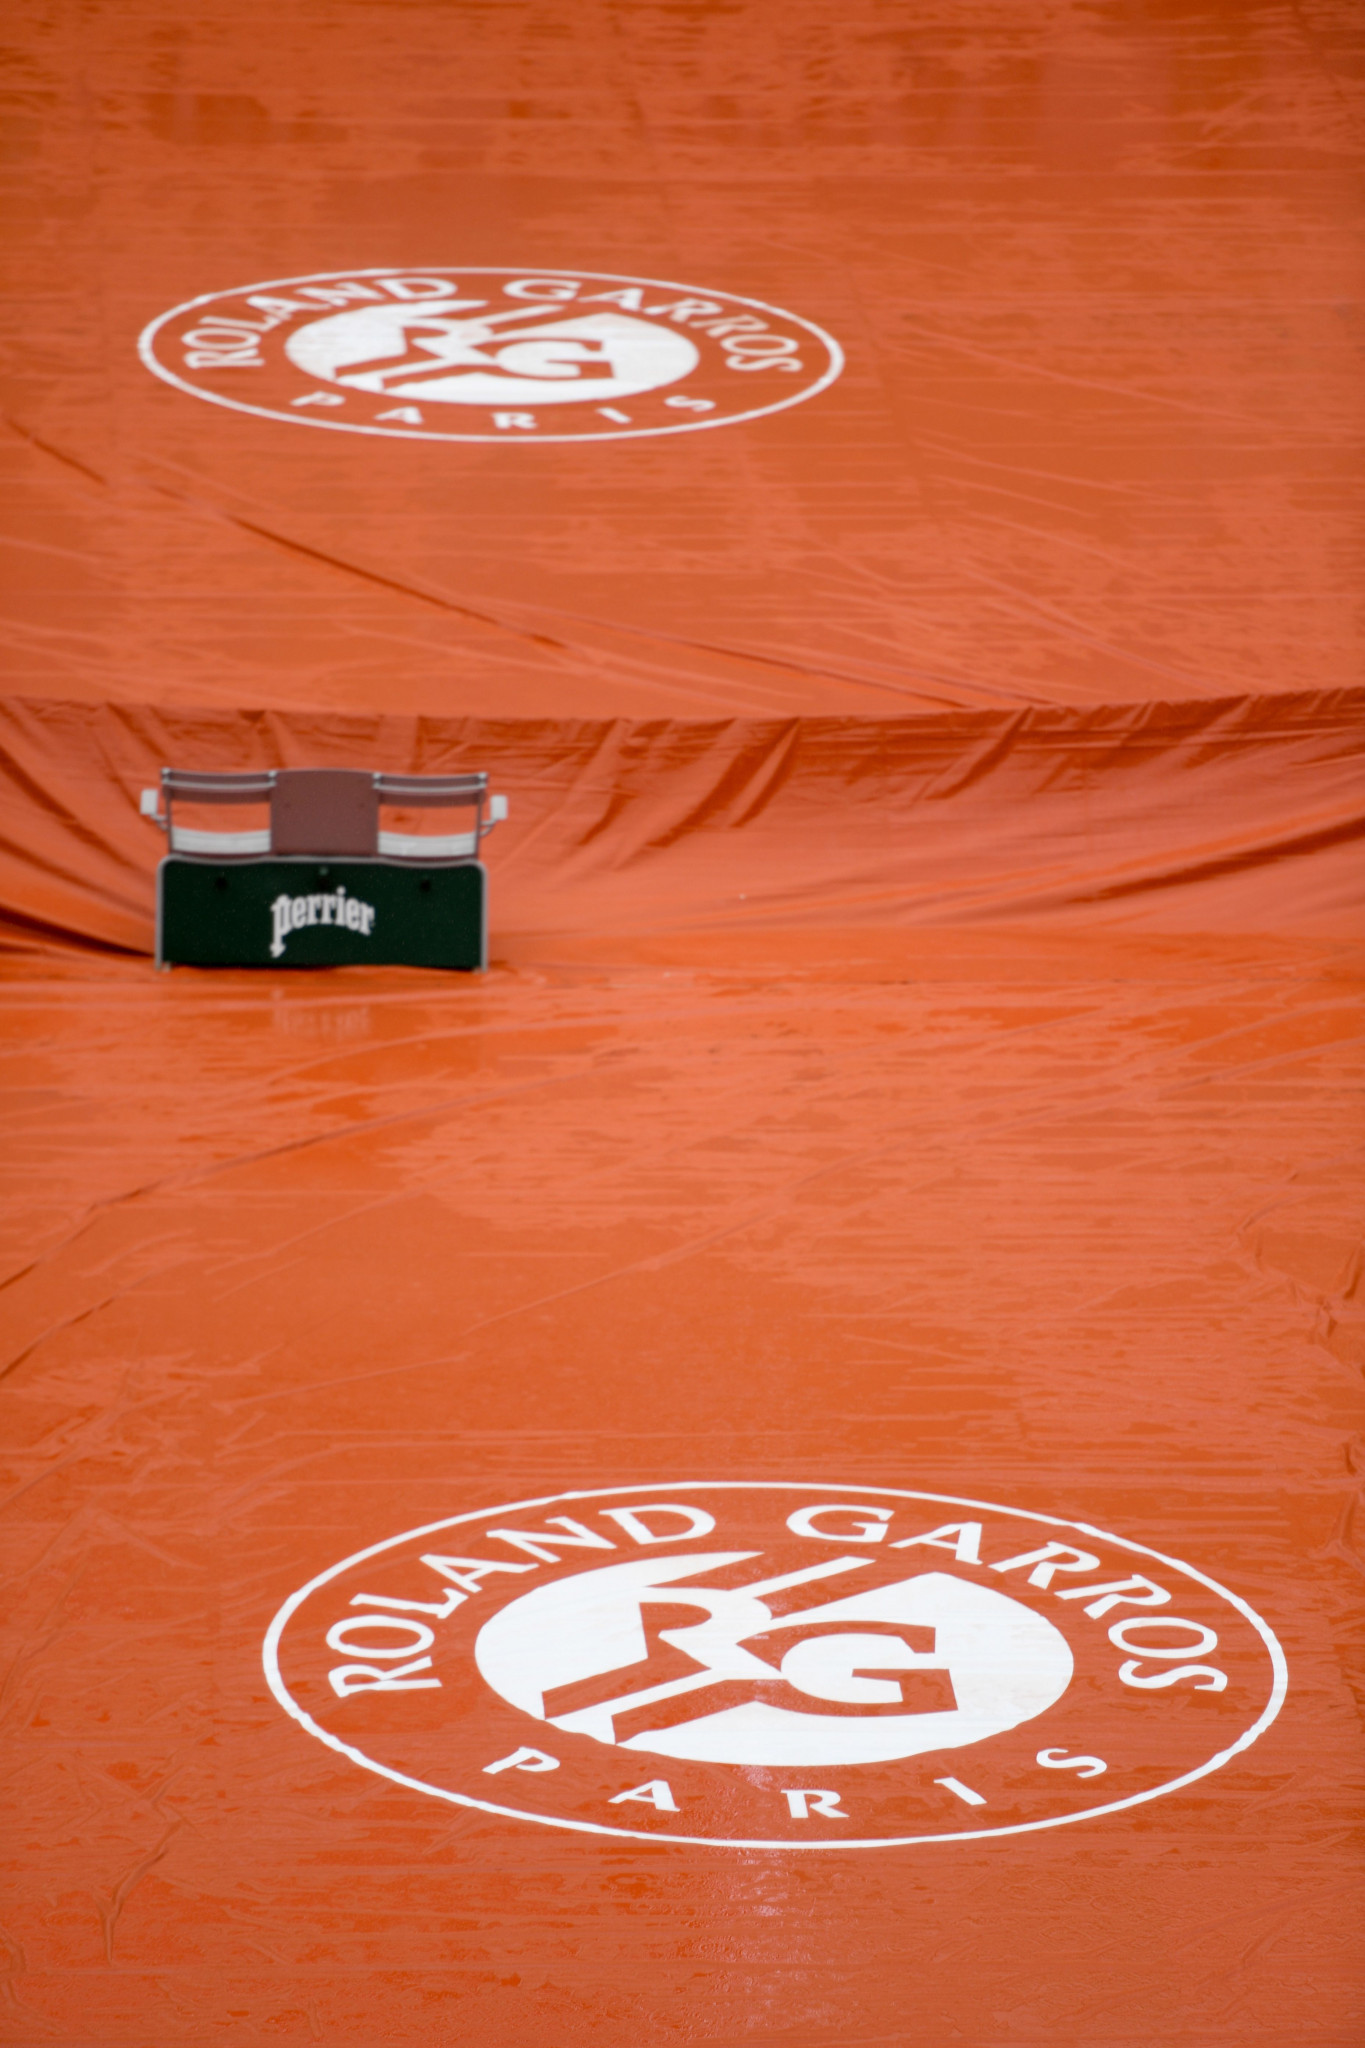 A court surface is covered as rain falls on day 11 of the French Open in Paris ©Getty Images